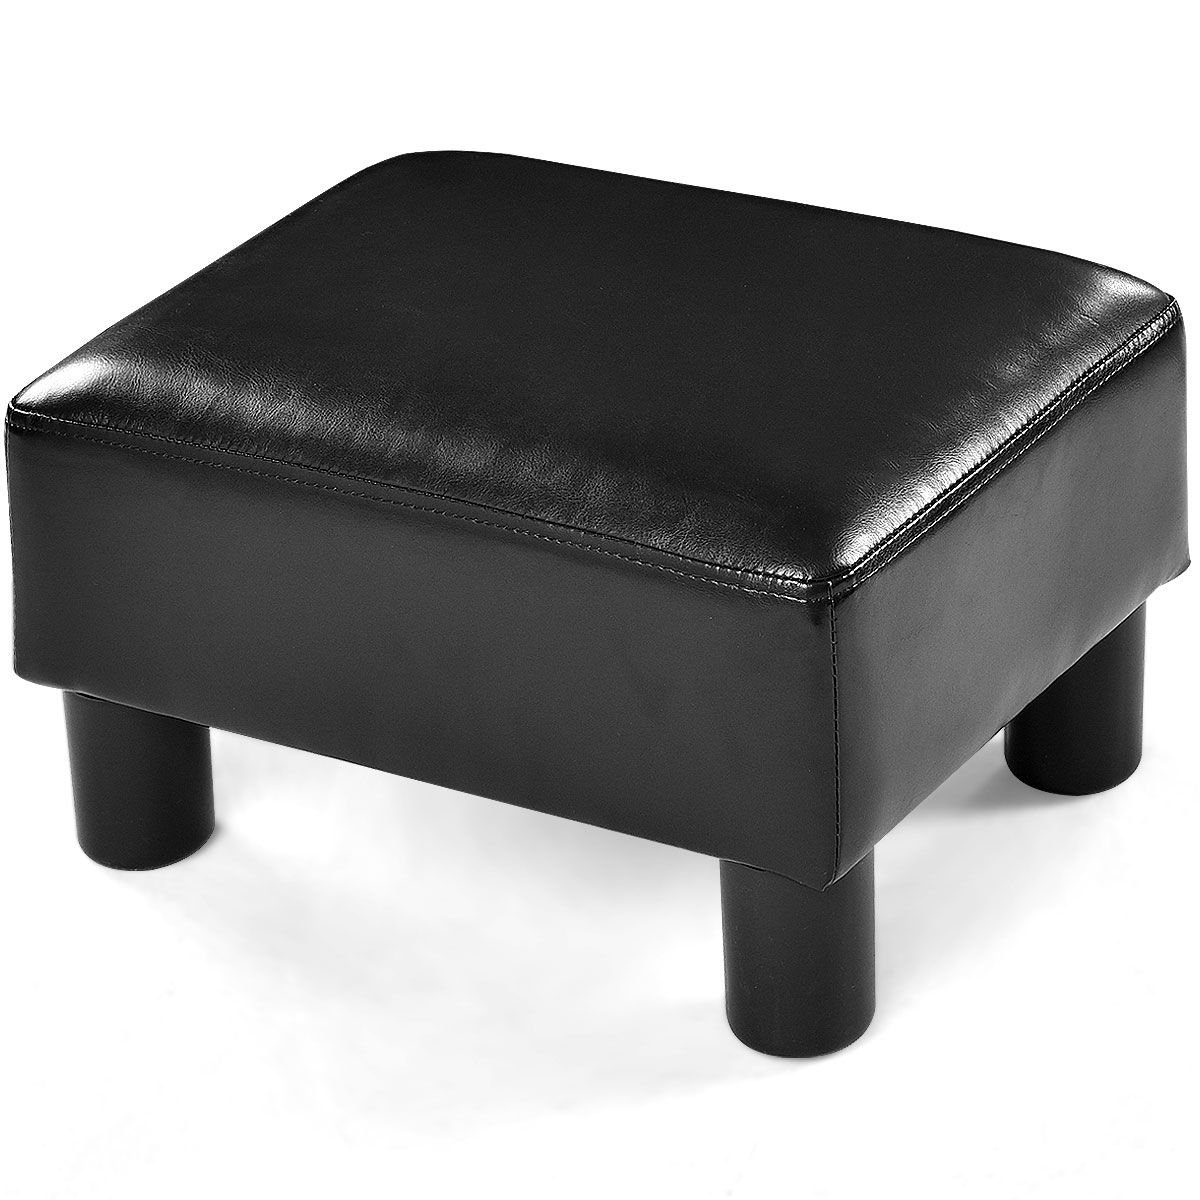 PU Leather Ottoman Rectangular Footrest Small Stool Black/Red/White - Black